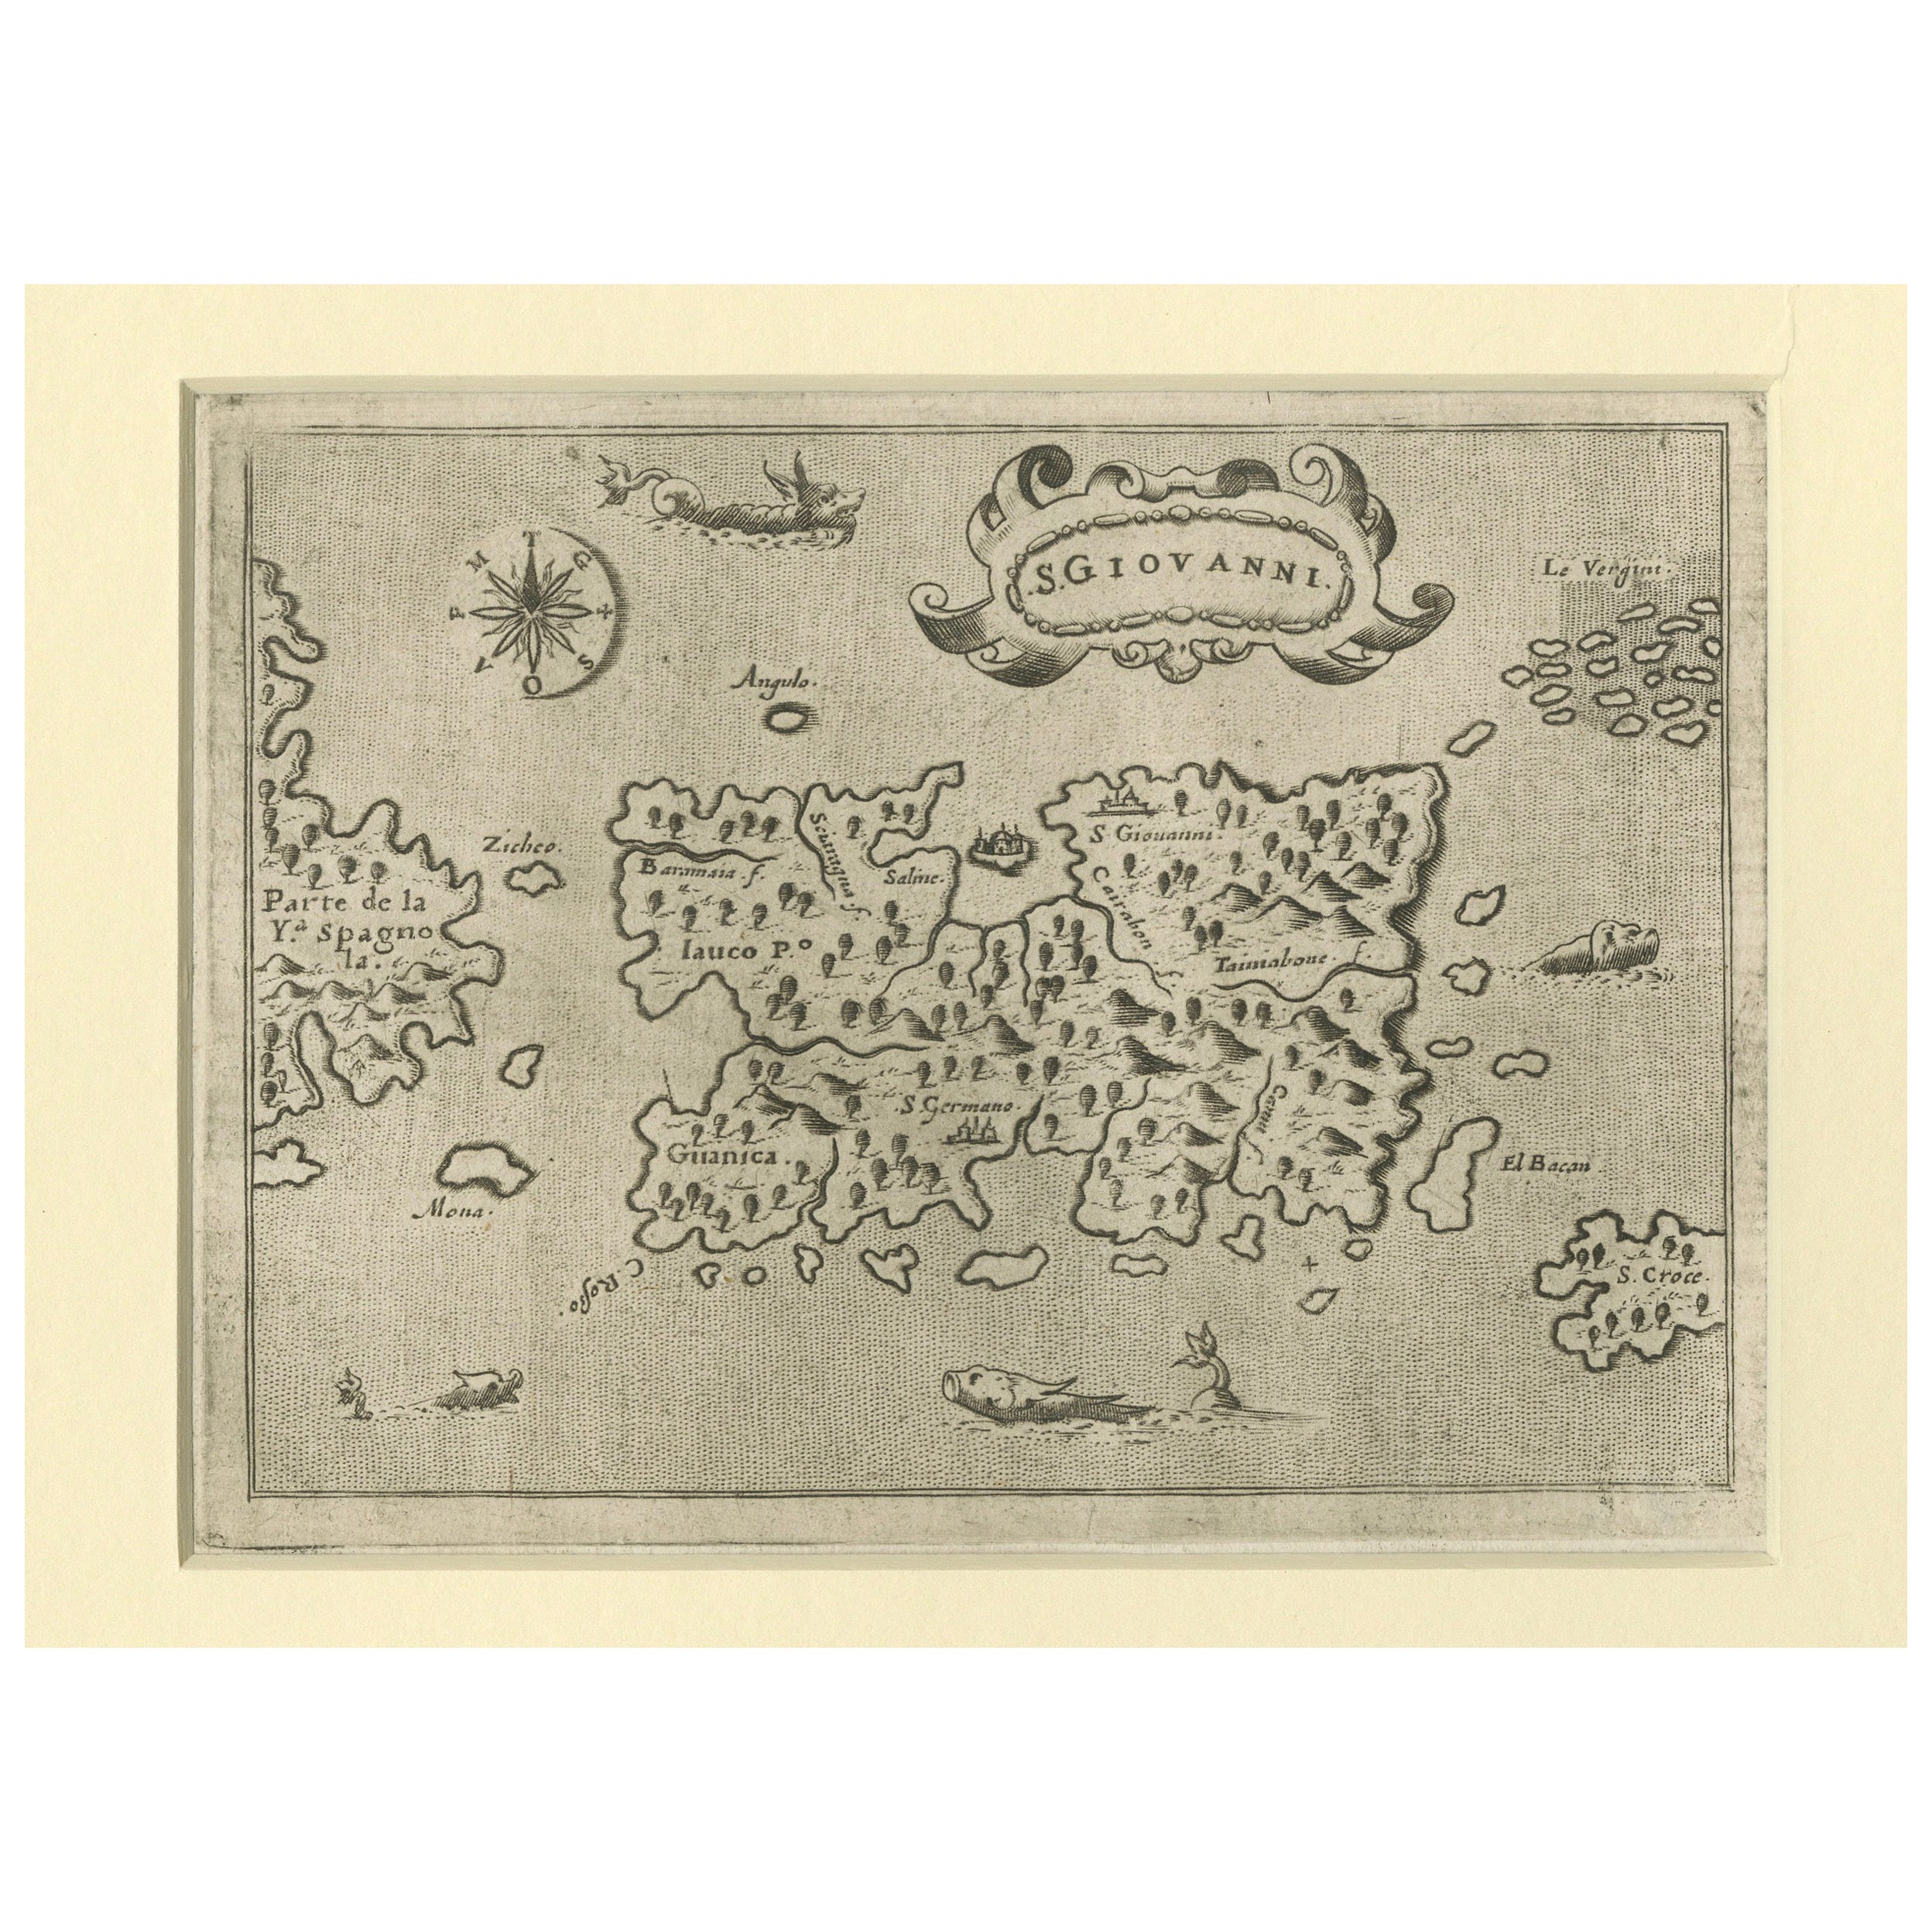 Early Map of Puerto Rico Printed in Venice by G. F. Camocio in 1571